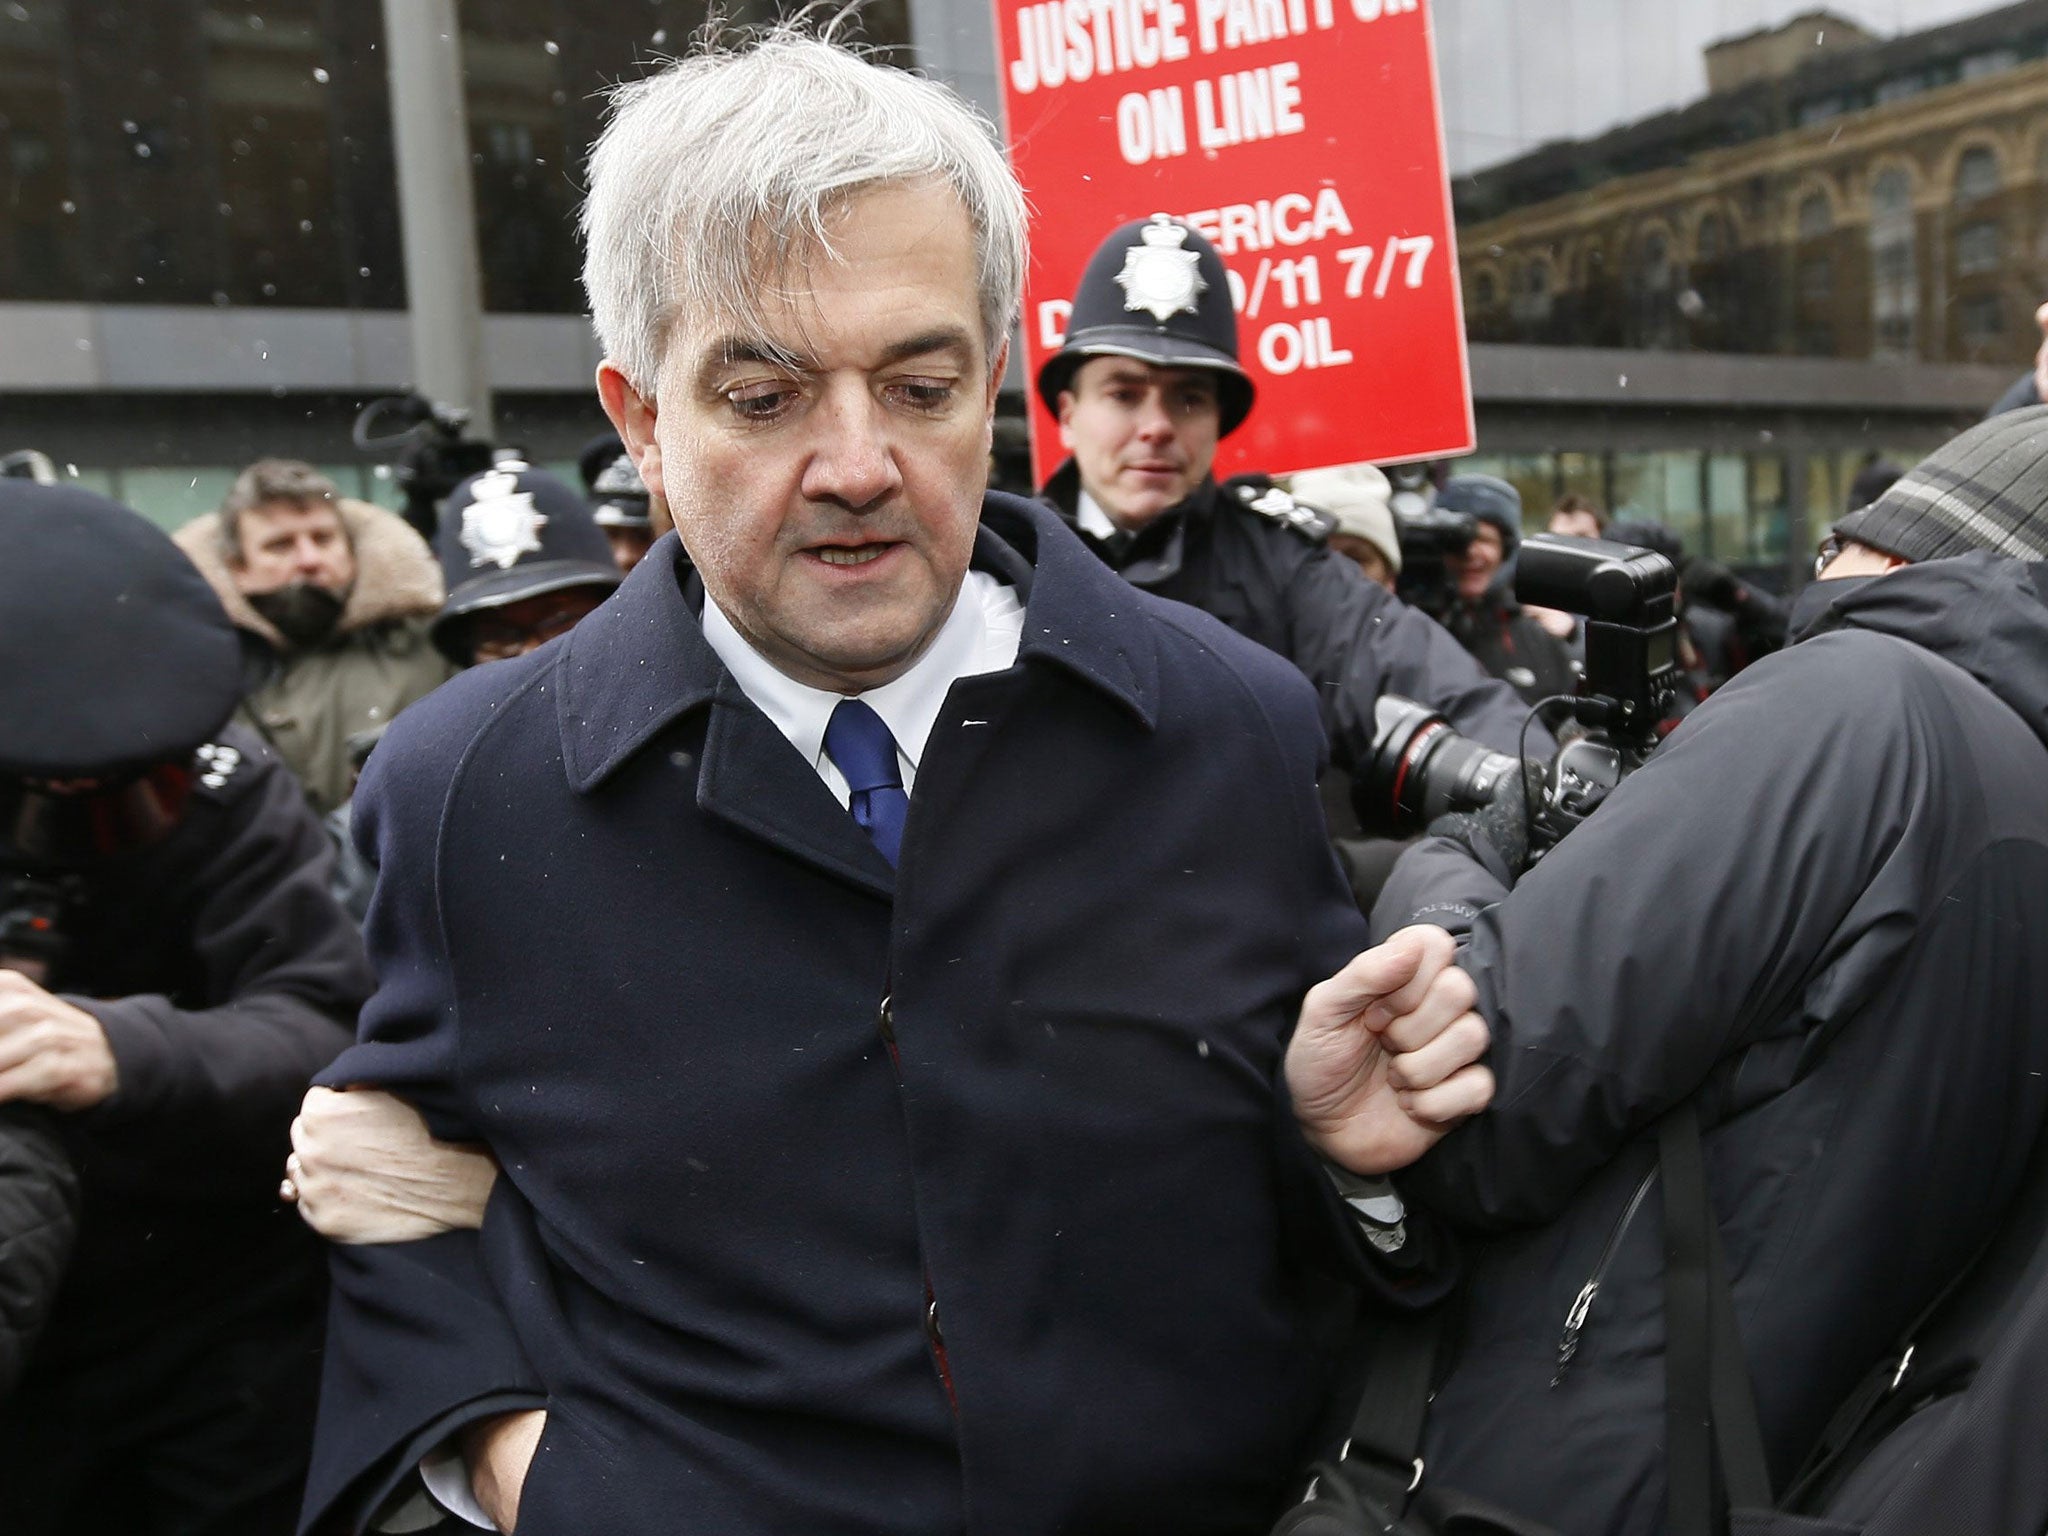 The revelation of police's snooping powers used to identify journalists sources, as found in the case of Chris Huhne